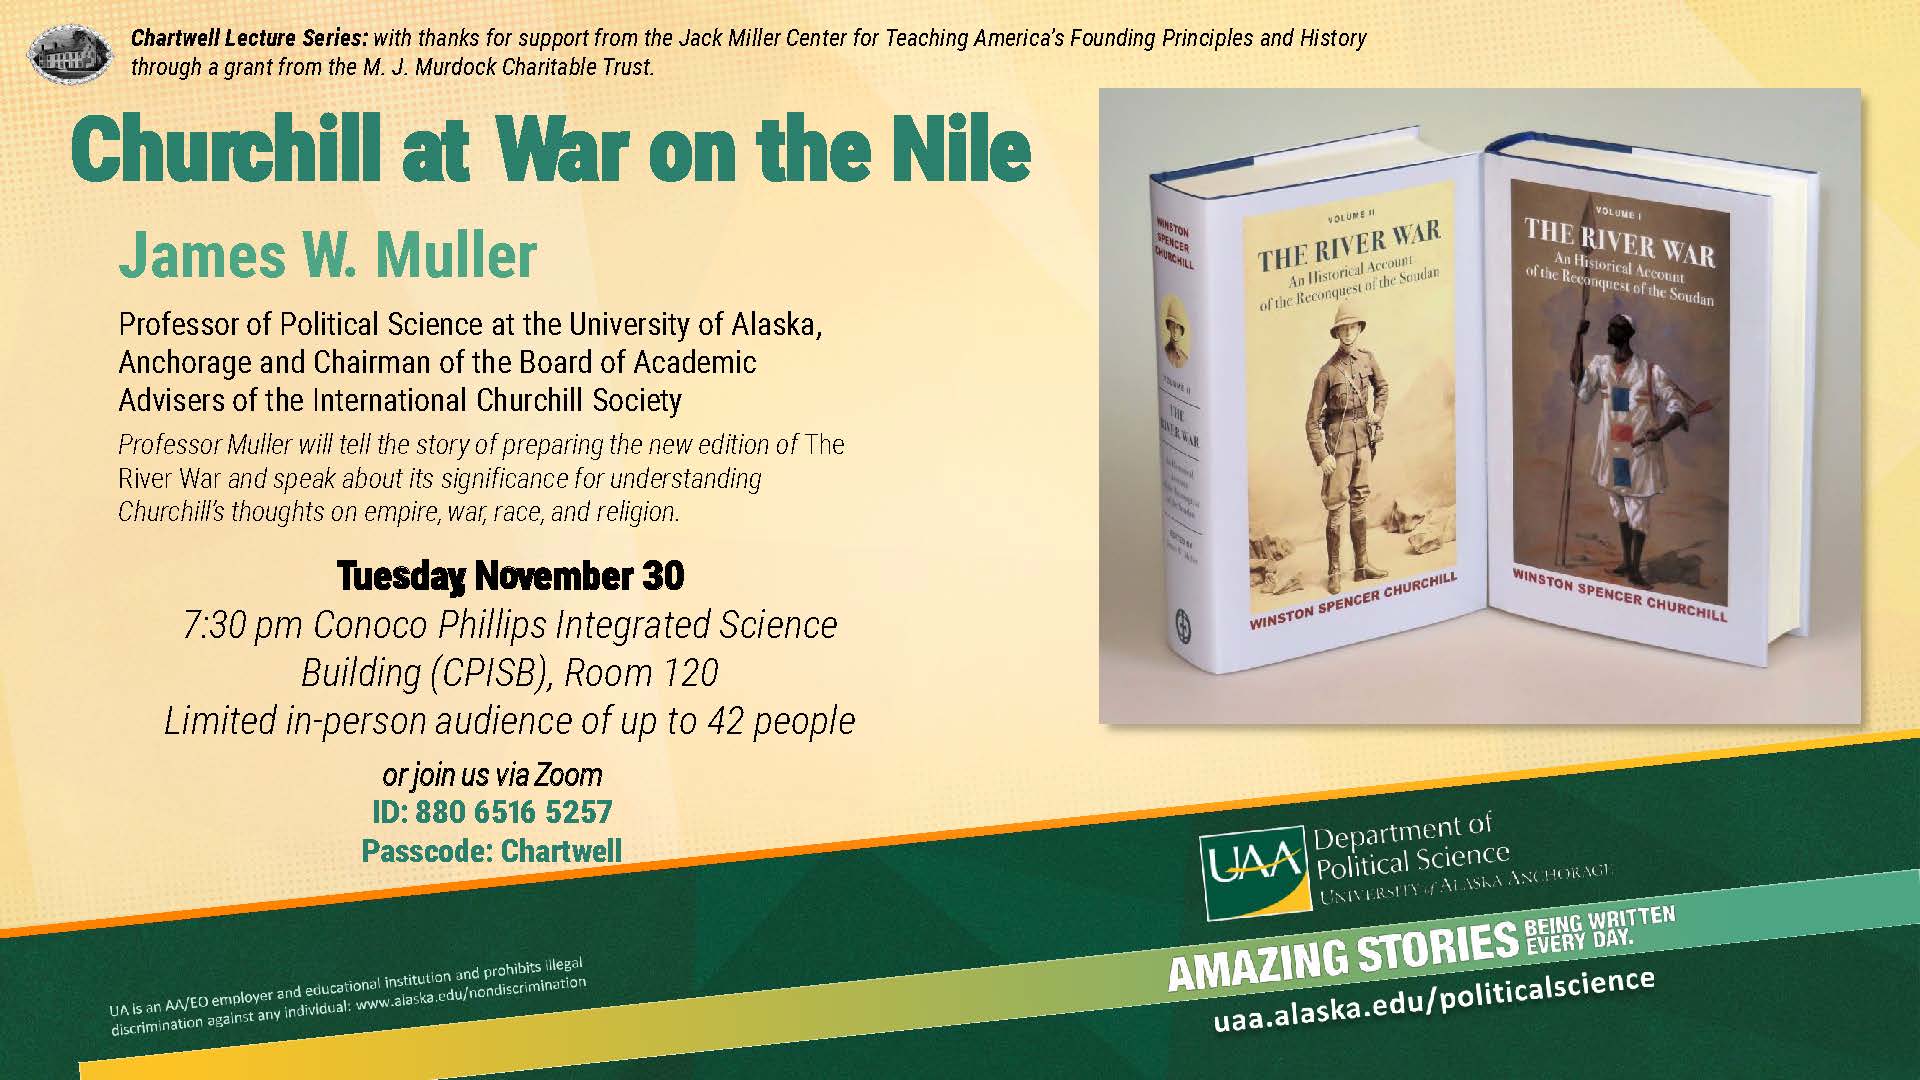 Churchill at War on the Nile flyer. Nov. 30, 7:30 p.m. Zoom or CPISB 120.